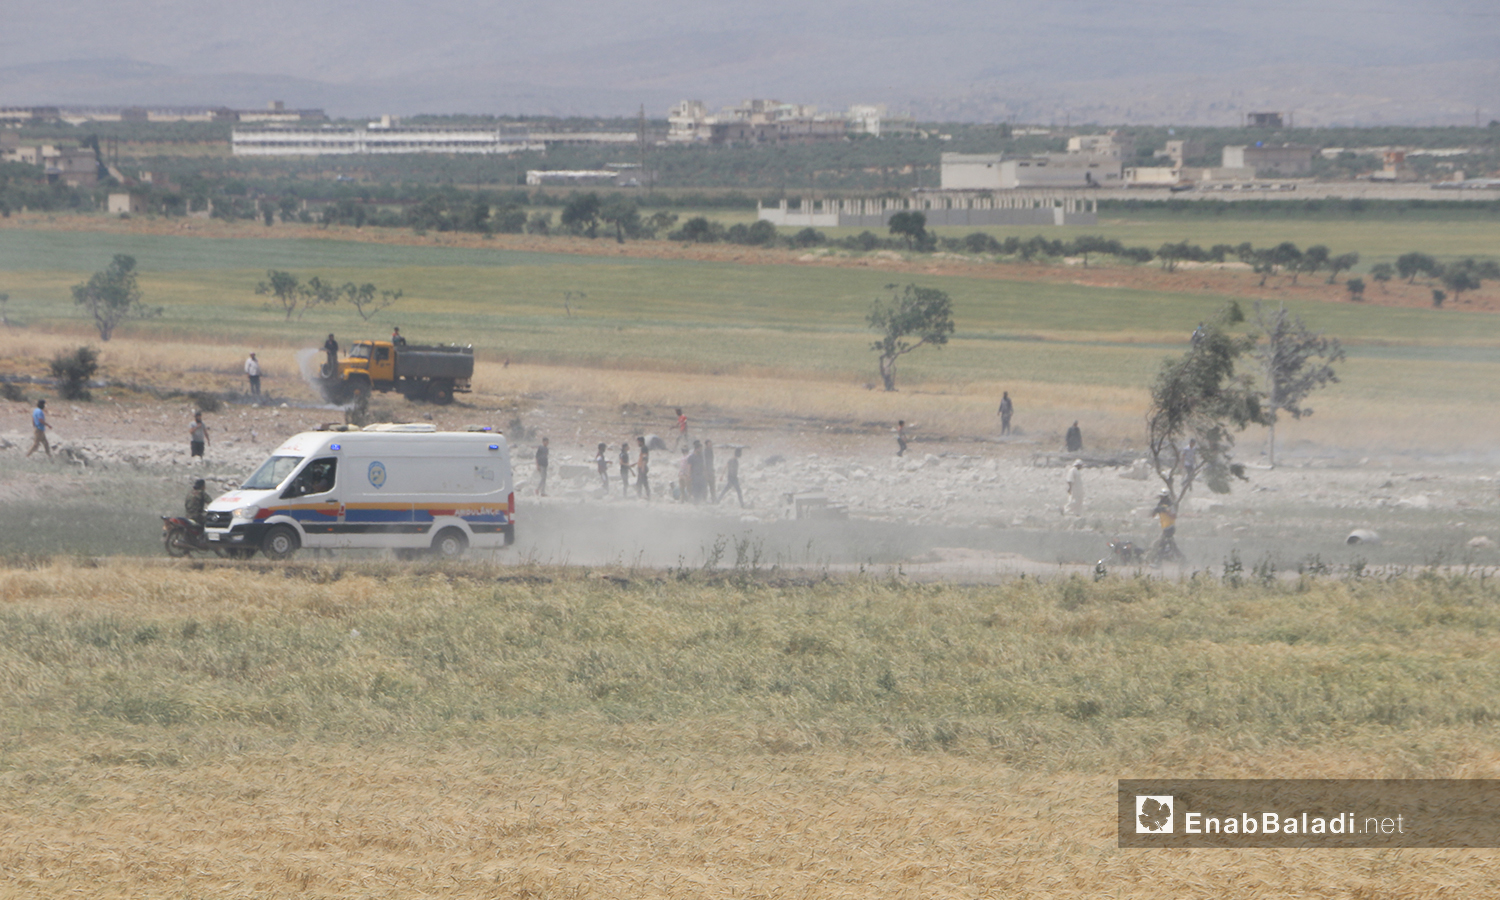 Civil defense elements working on putting down the fires and moving the injured to hospitals - 03 May 2021 (Anas al-Khouli / Enab Baladi)
